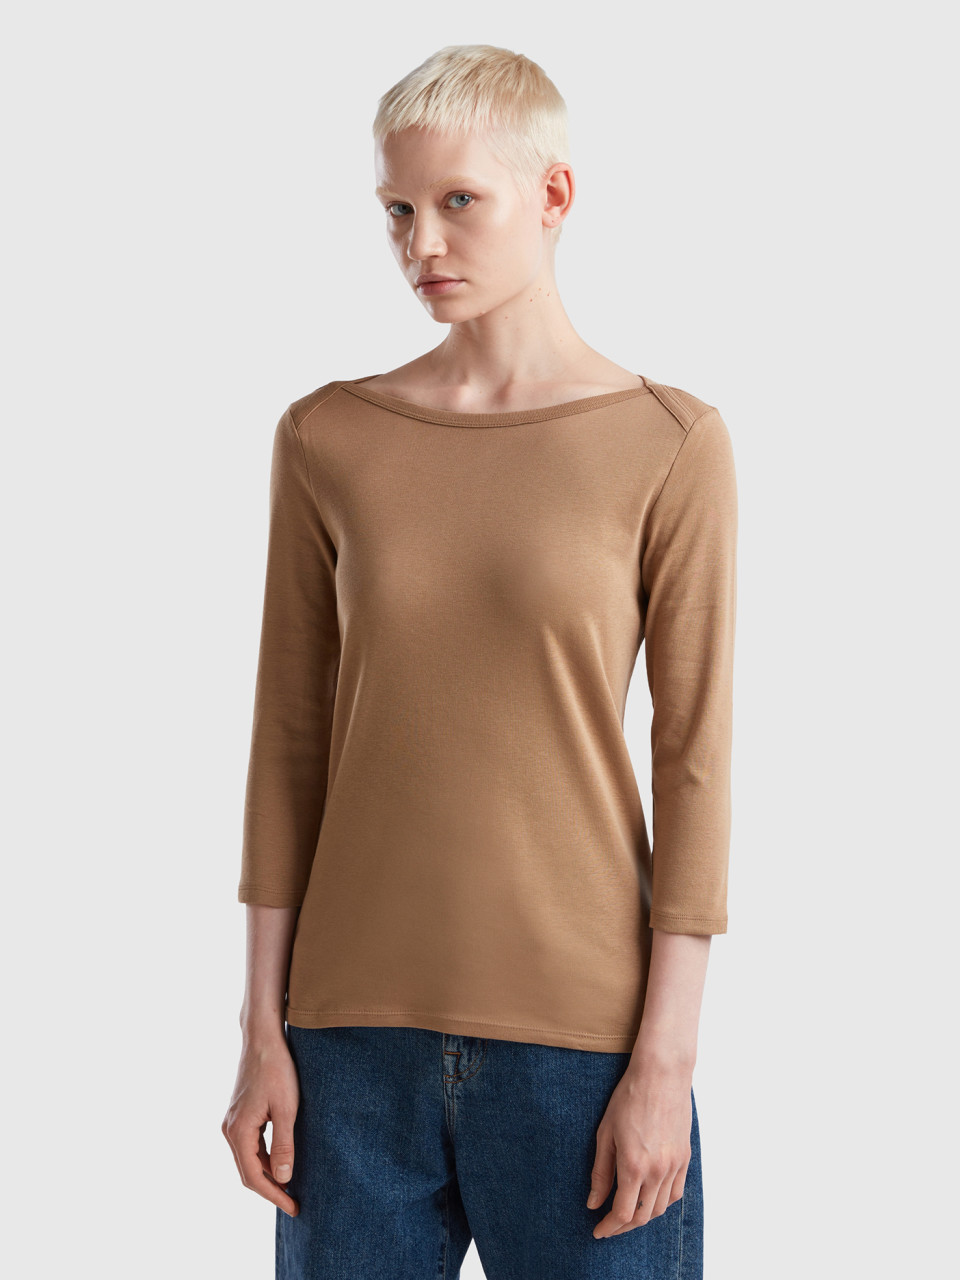 Benetton, T-shirt With Boat Neck In 100% Cotton, Camel, Women